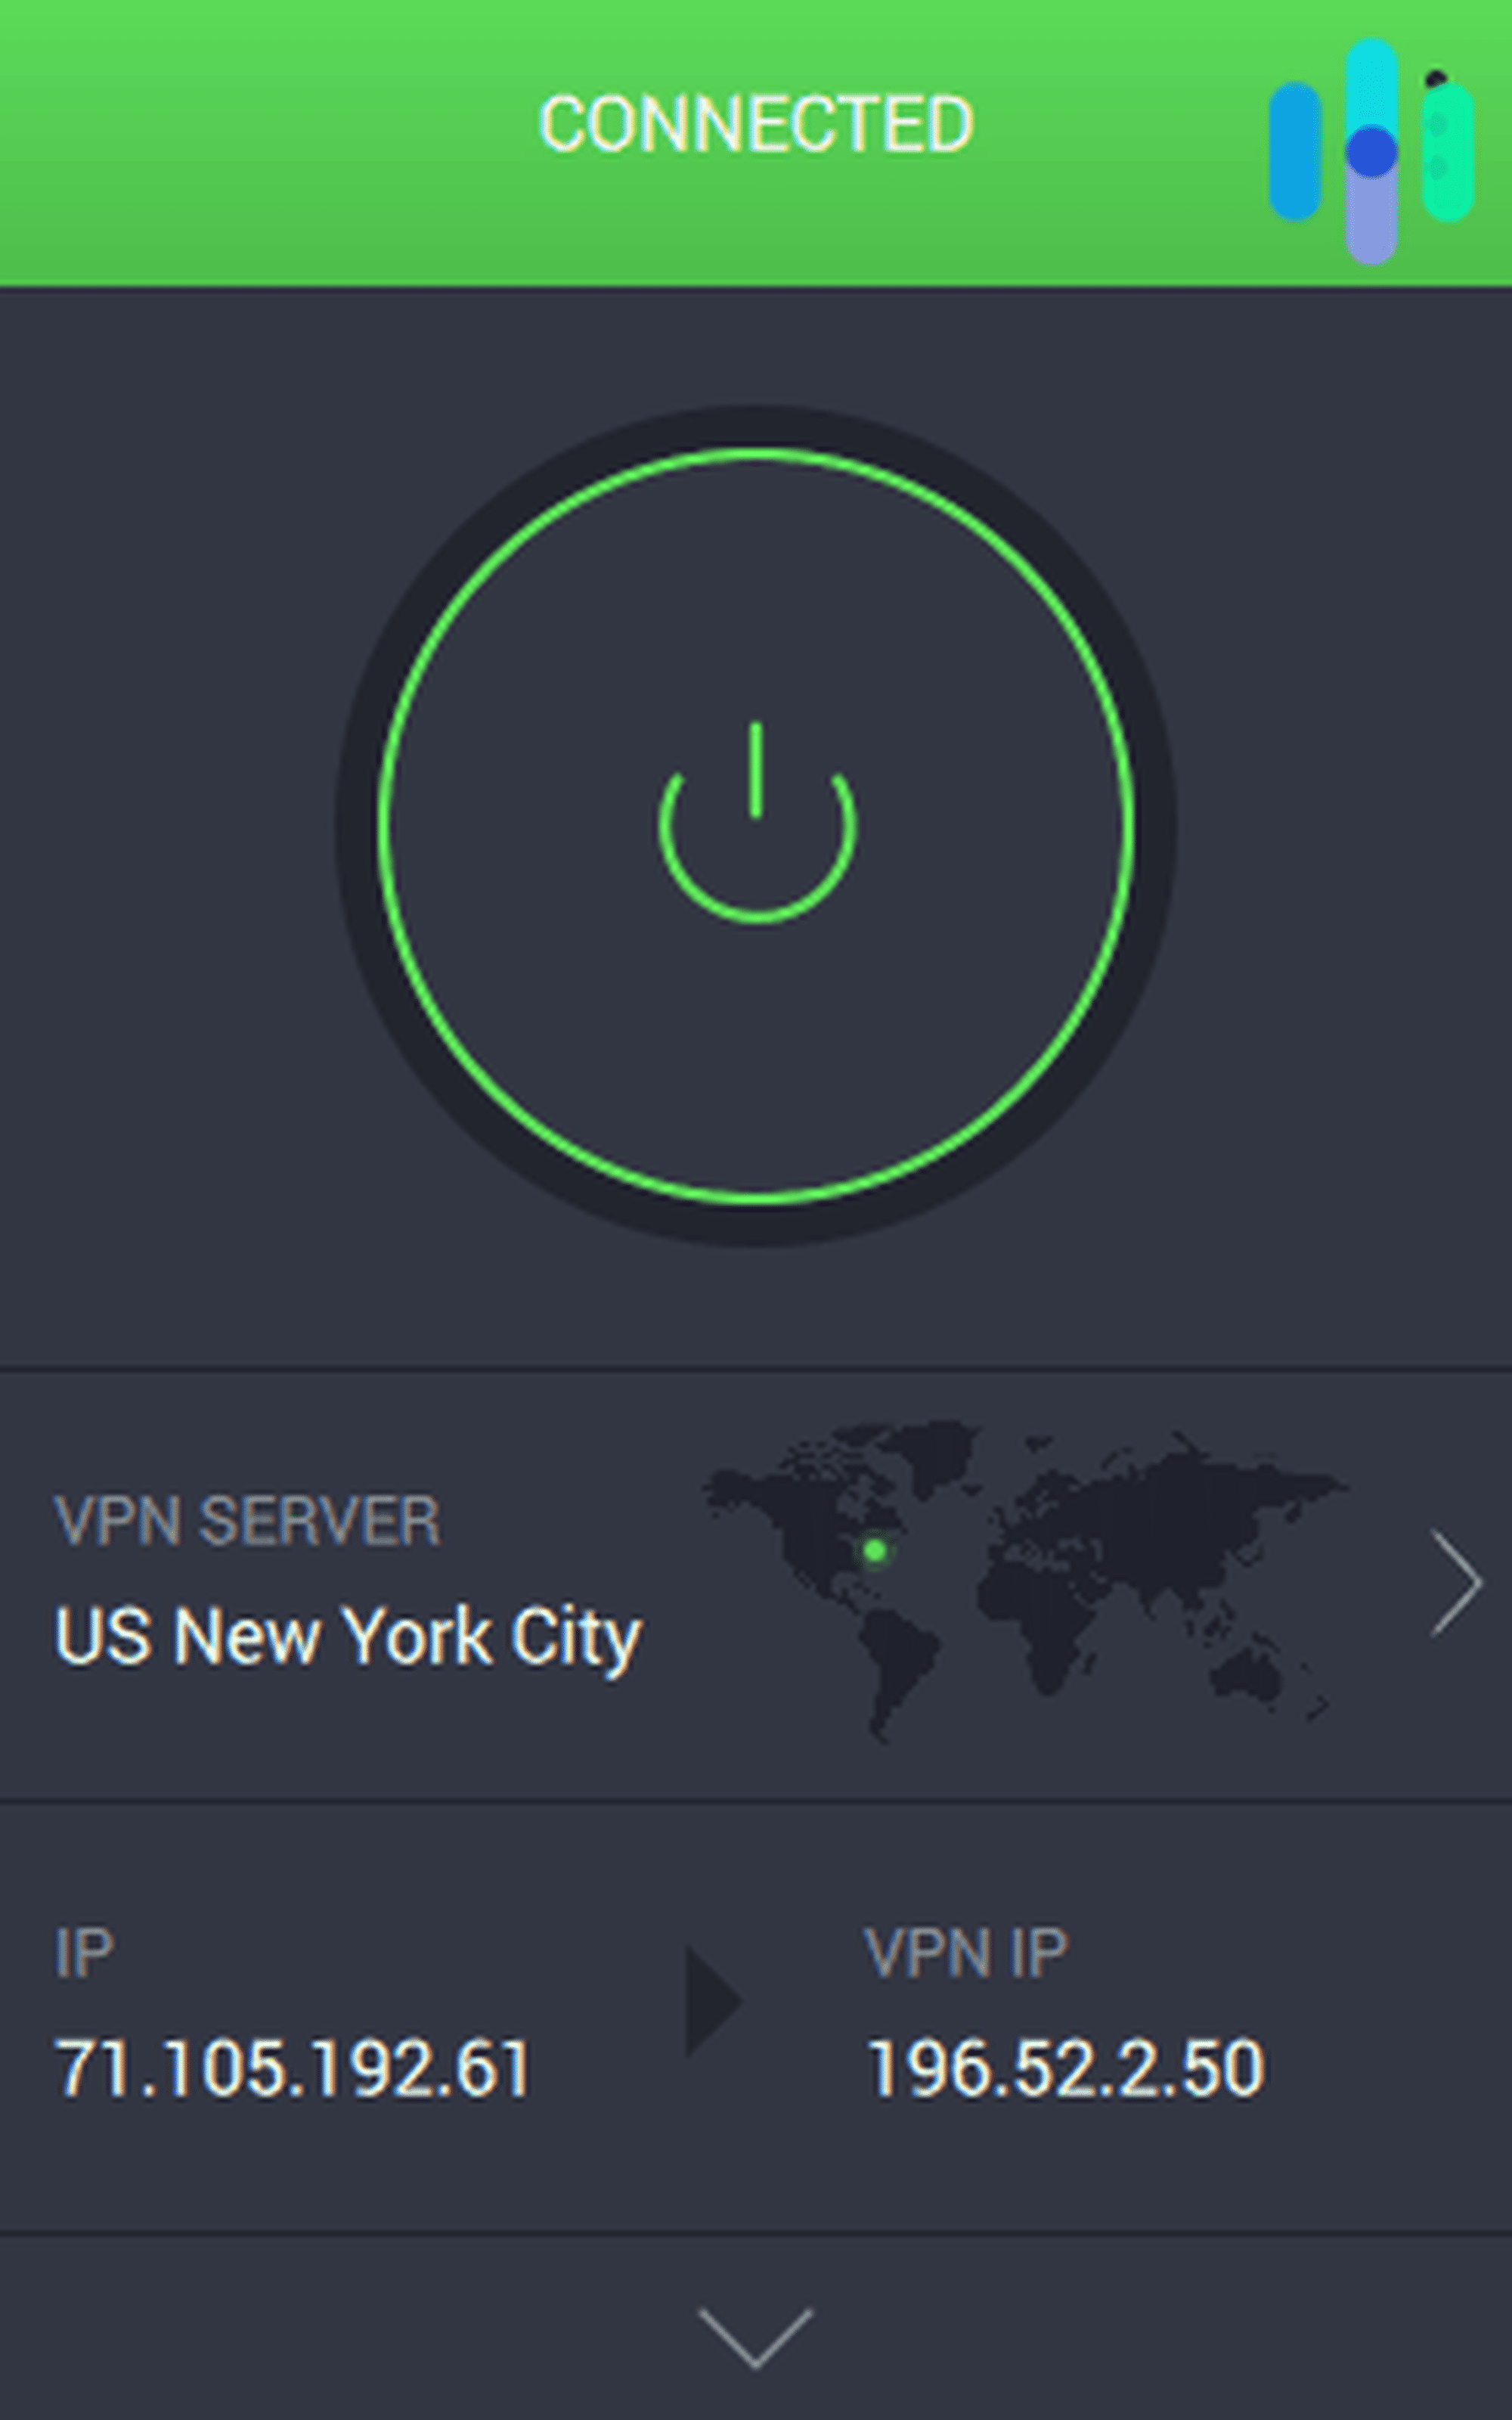 Connected to New York City using Private Internet Access VPN